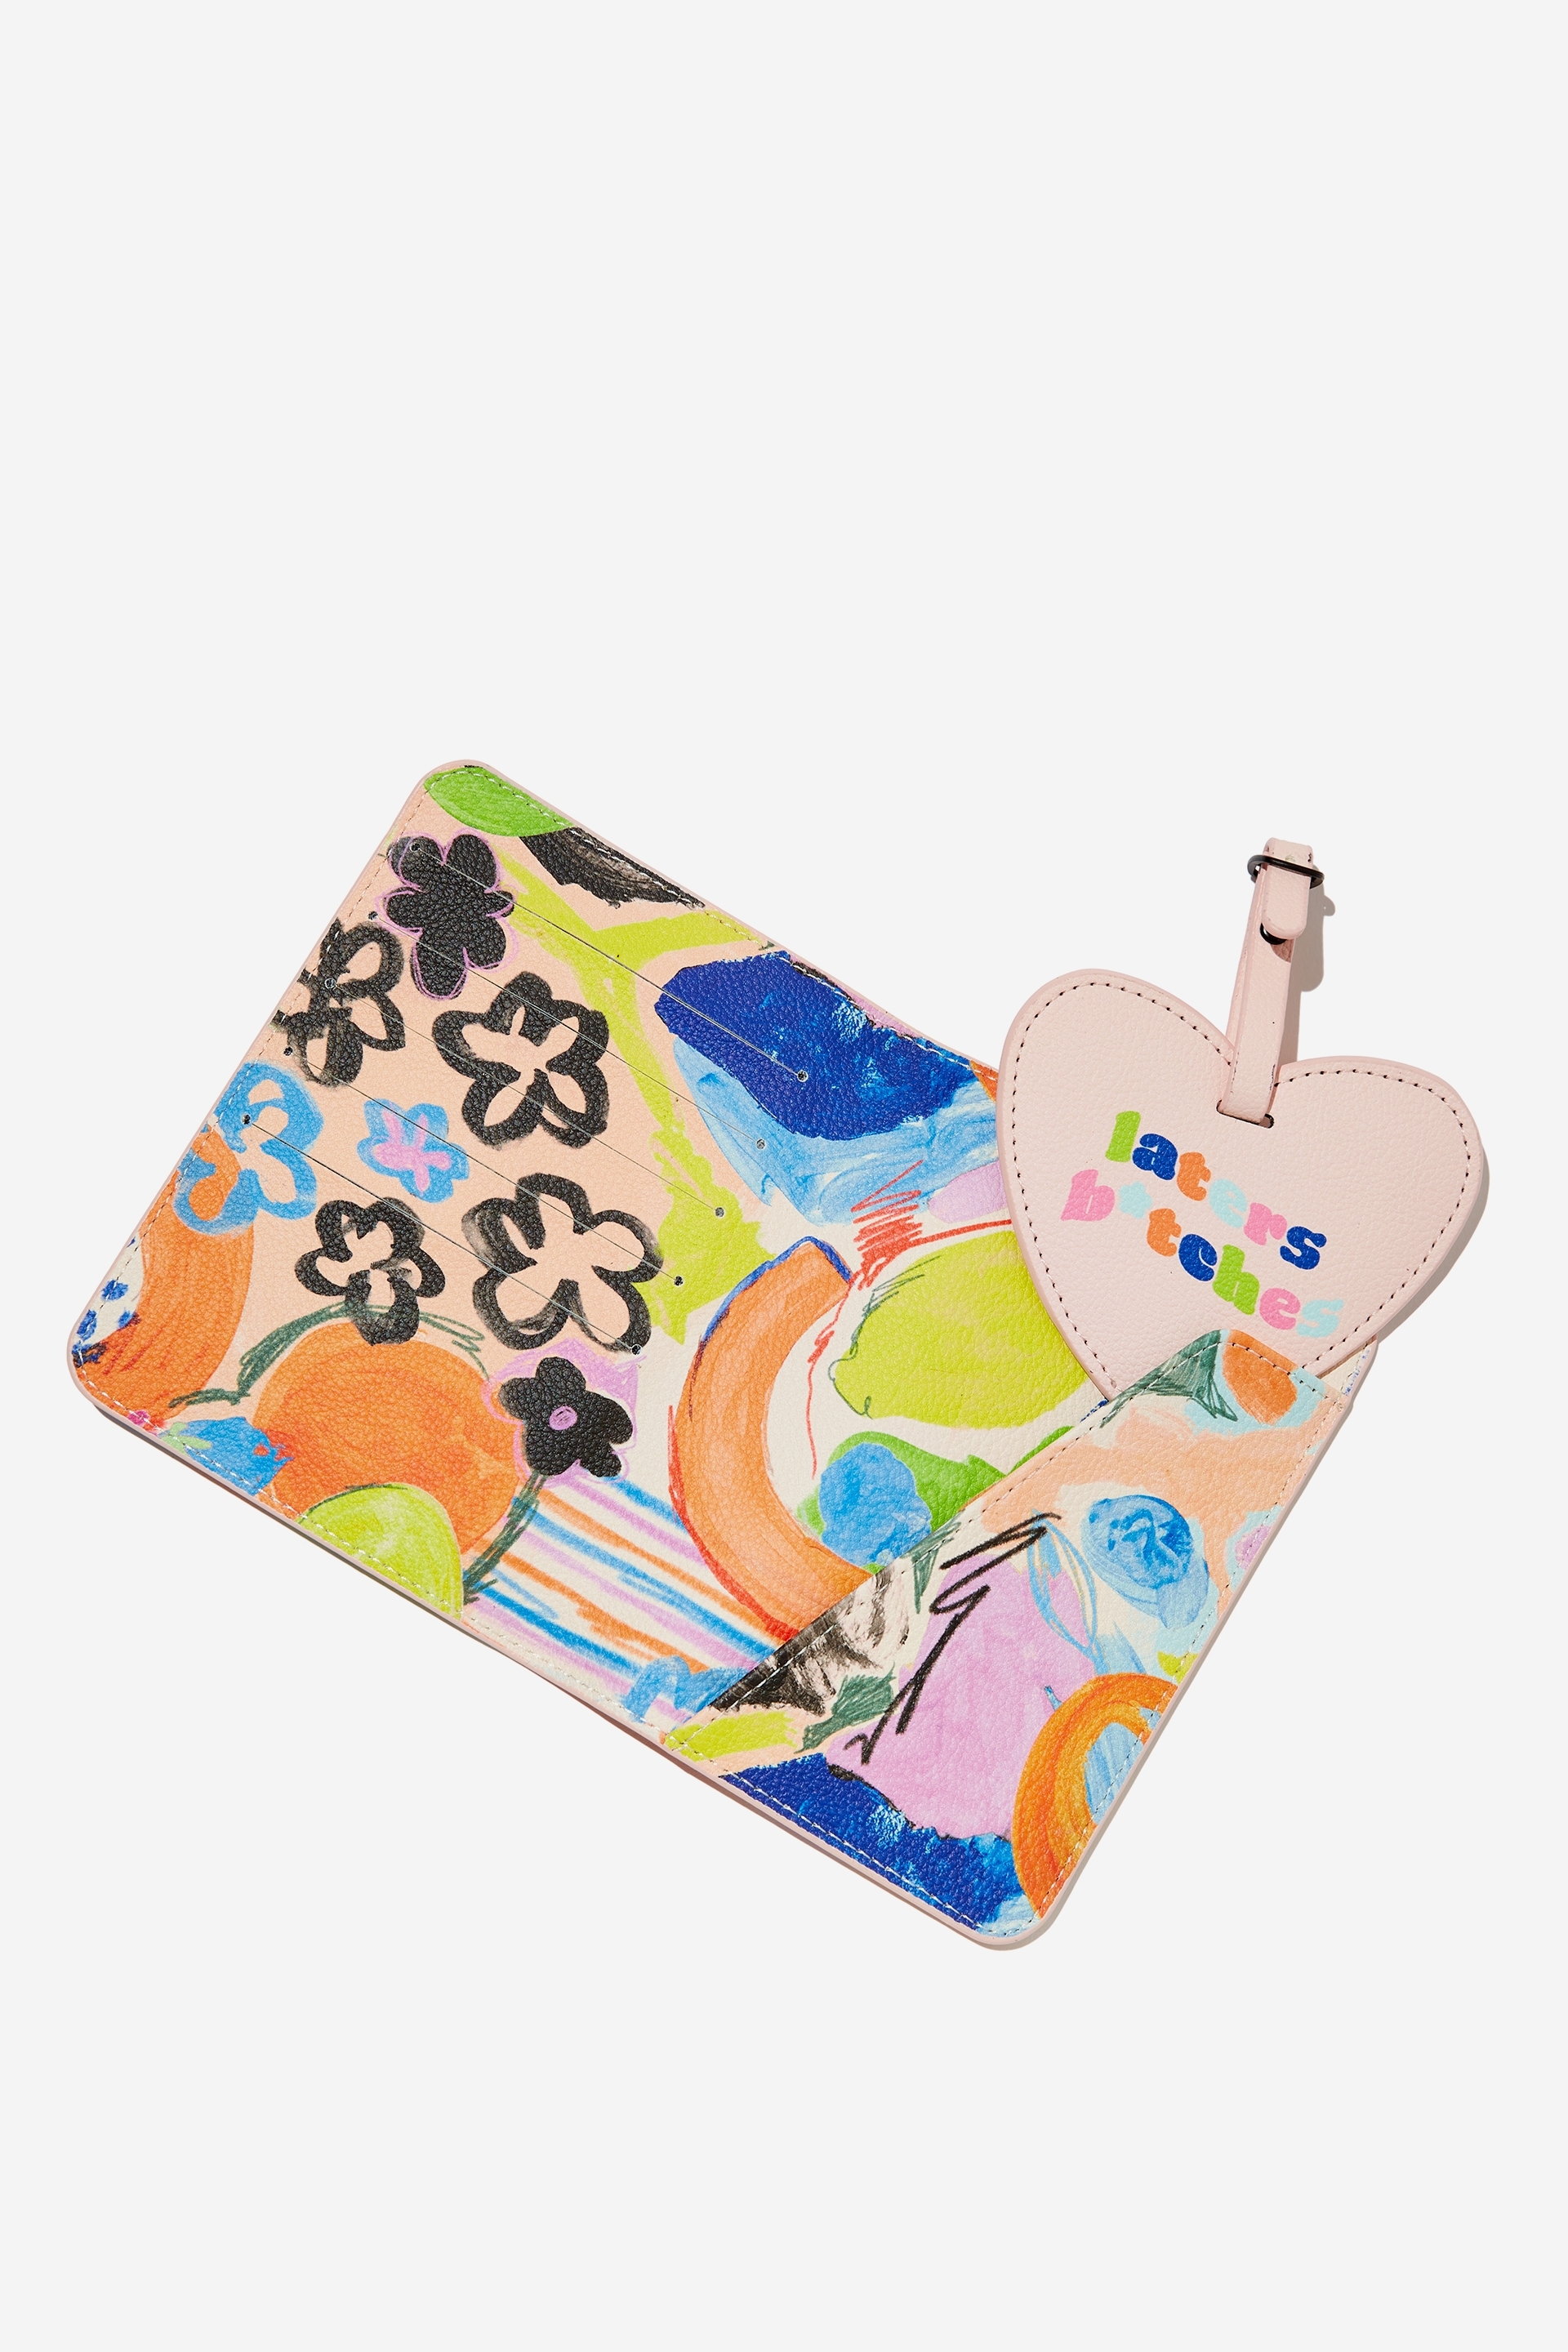 Typo - The Wanderer Passport & Luggage Tag Set - Abstract fruit laters bitches!